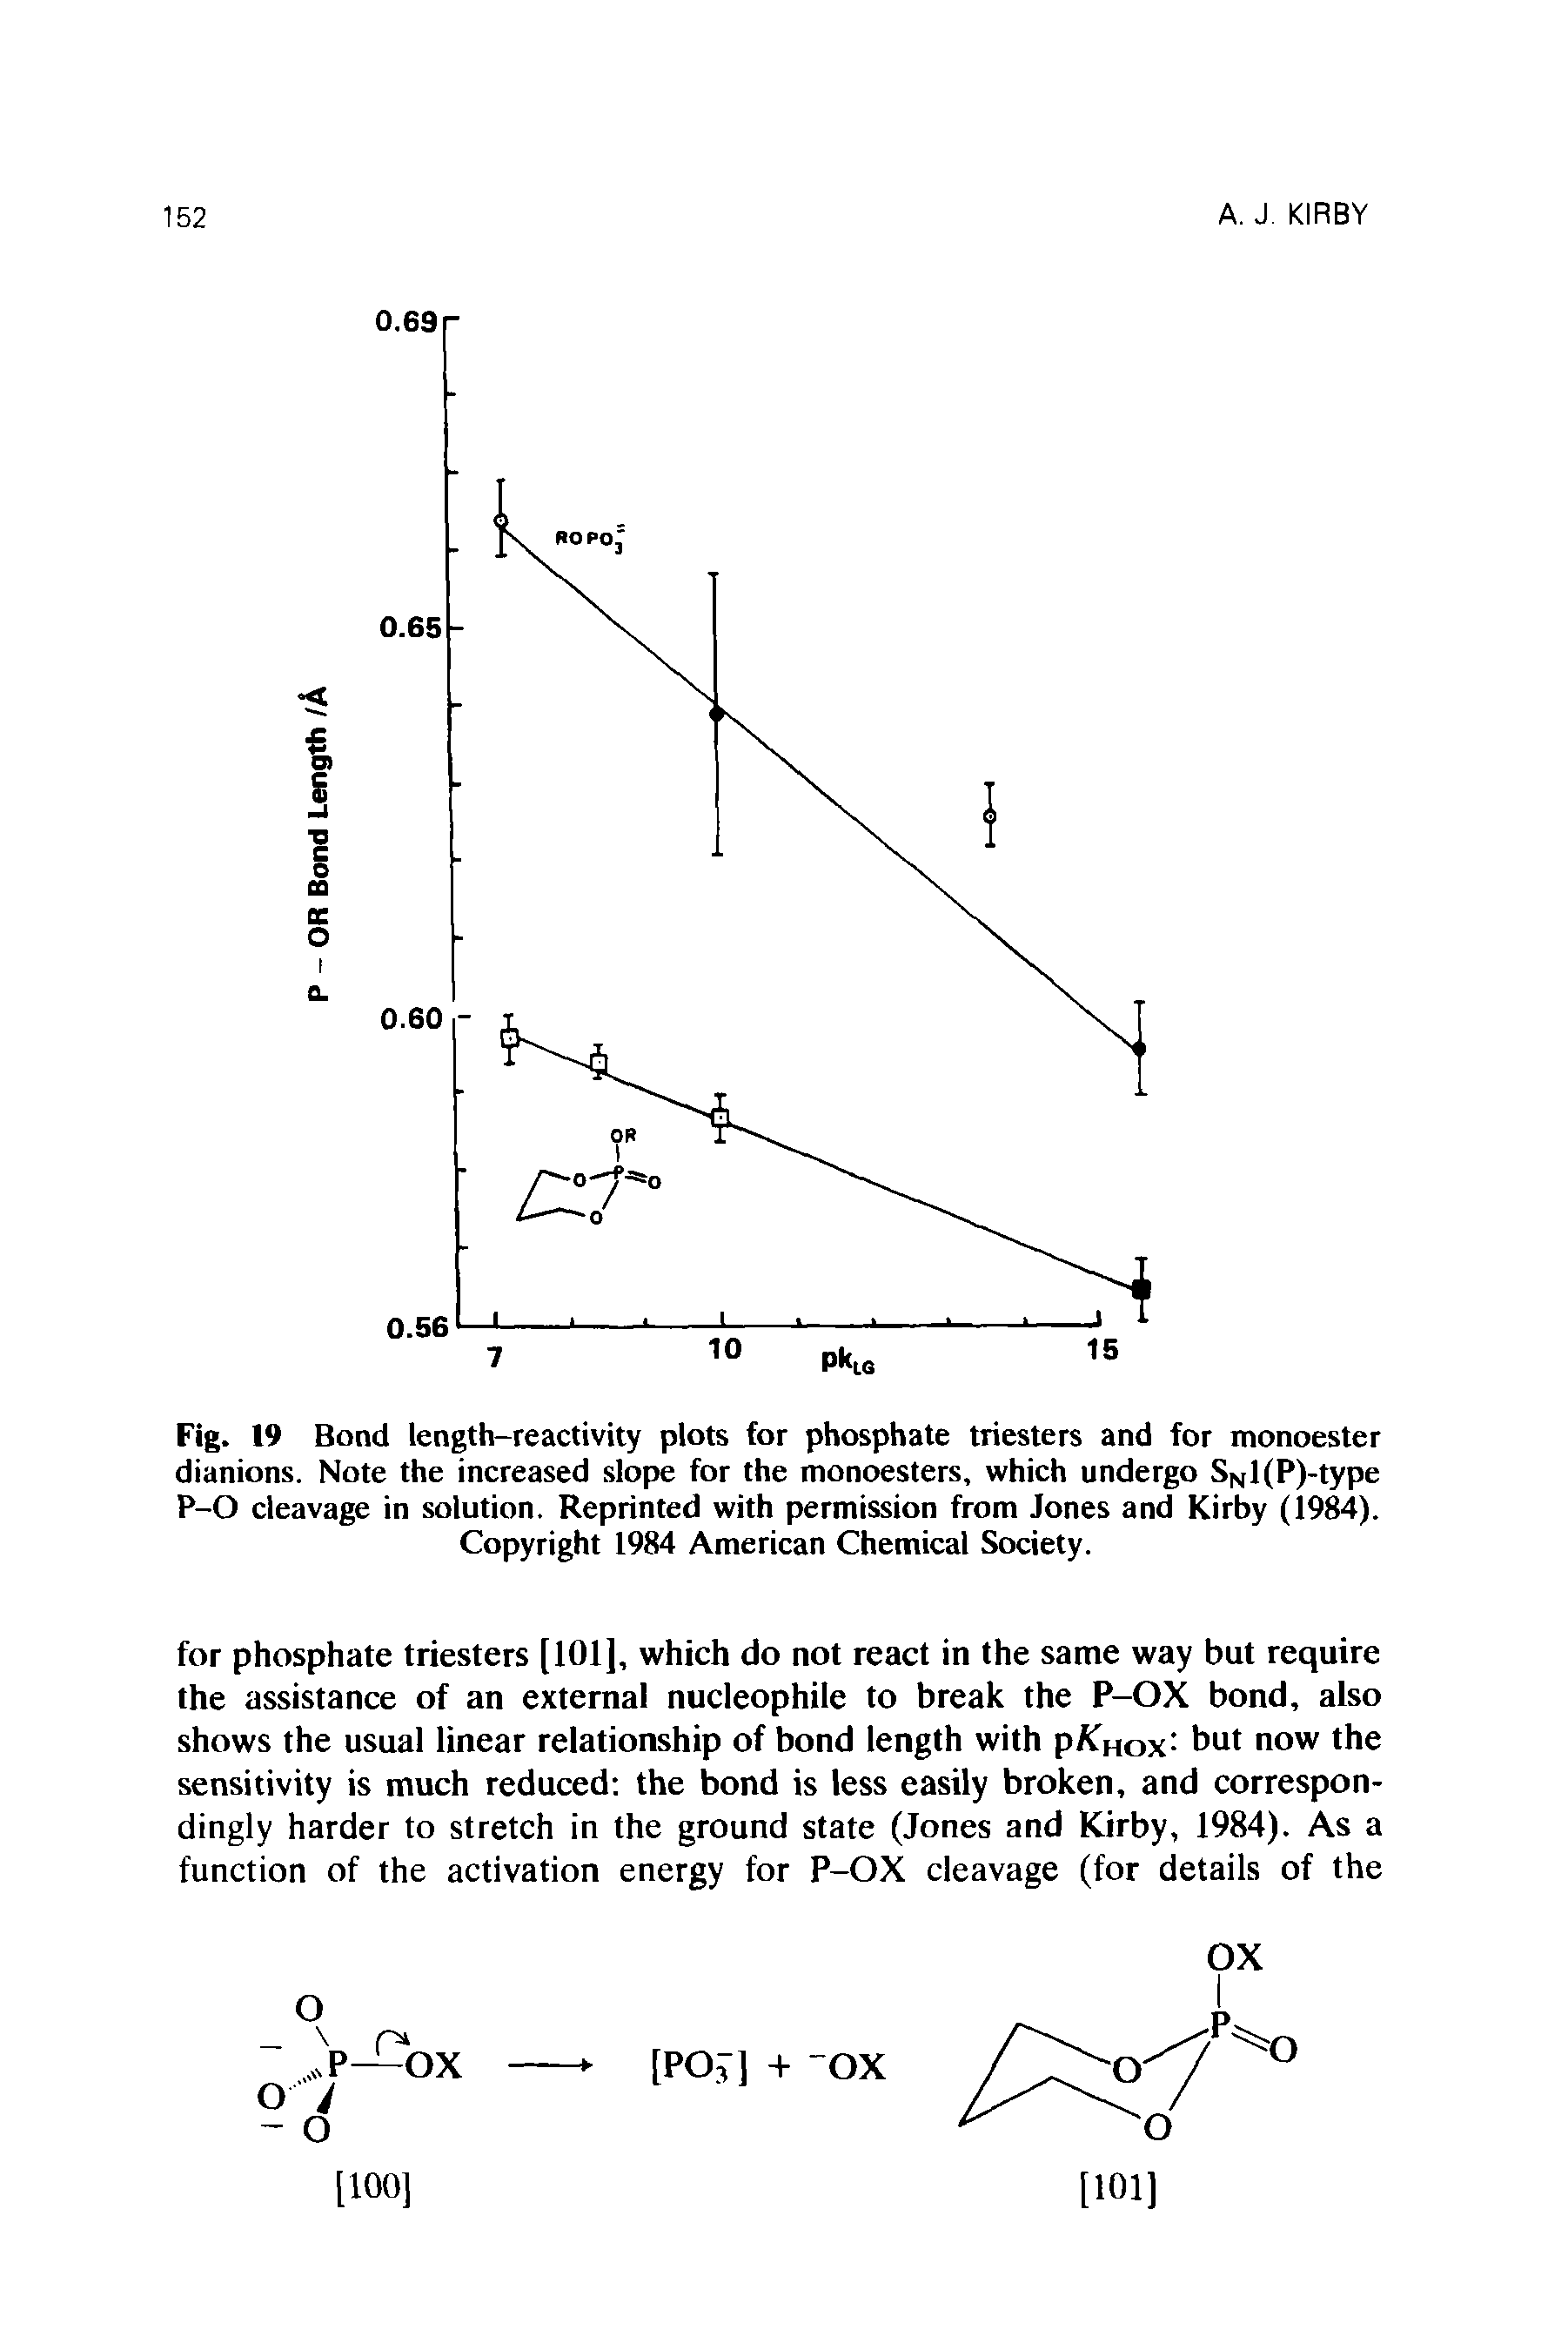 Fig. 19 Bond length-reactivity plots for phosphate triesters and for monoester dianions. Note the increased slope for the monoesters, which undergo SNl(P)-type P-O cleavage in solution. Reprinted with permission from Jones and Kirby (1984). Copyright 1984 American Chemical Society.